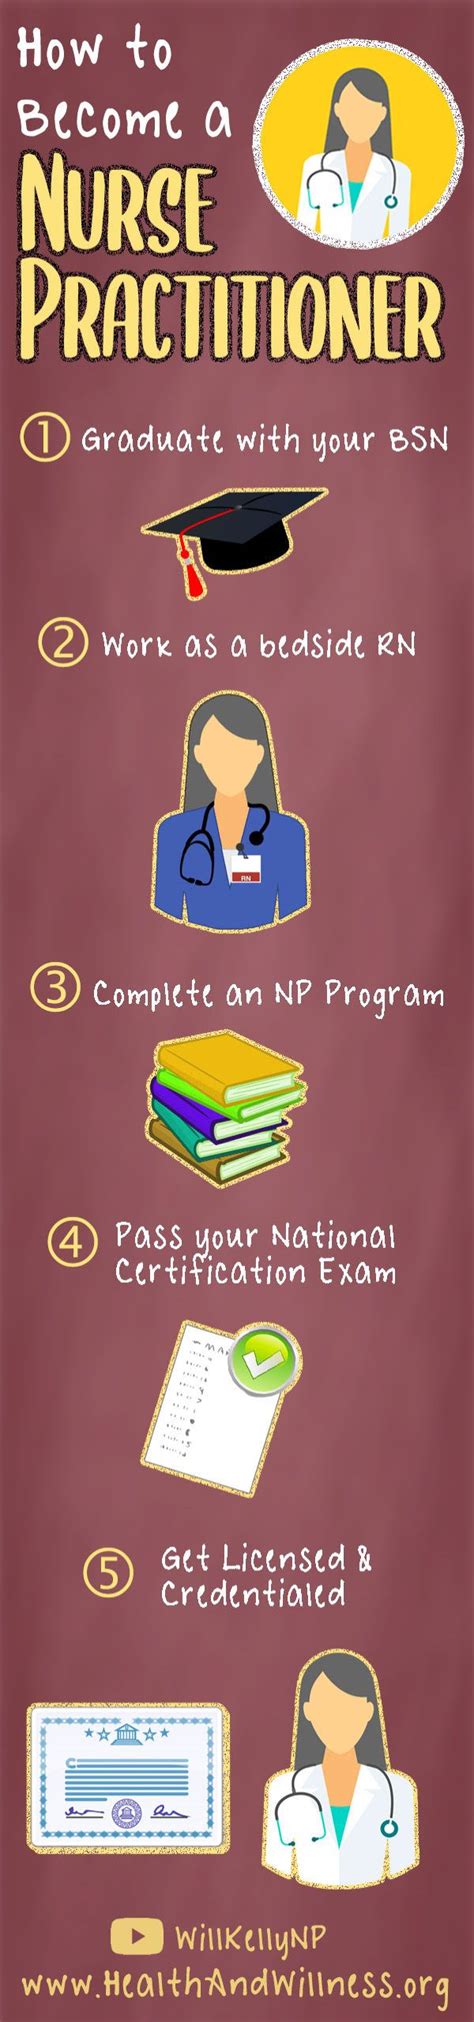 How To Become A Nurse Practitioner Becoming A Nurse Practitioner Nurse Practitioner Nurse